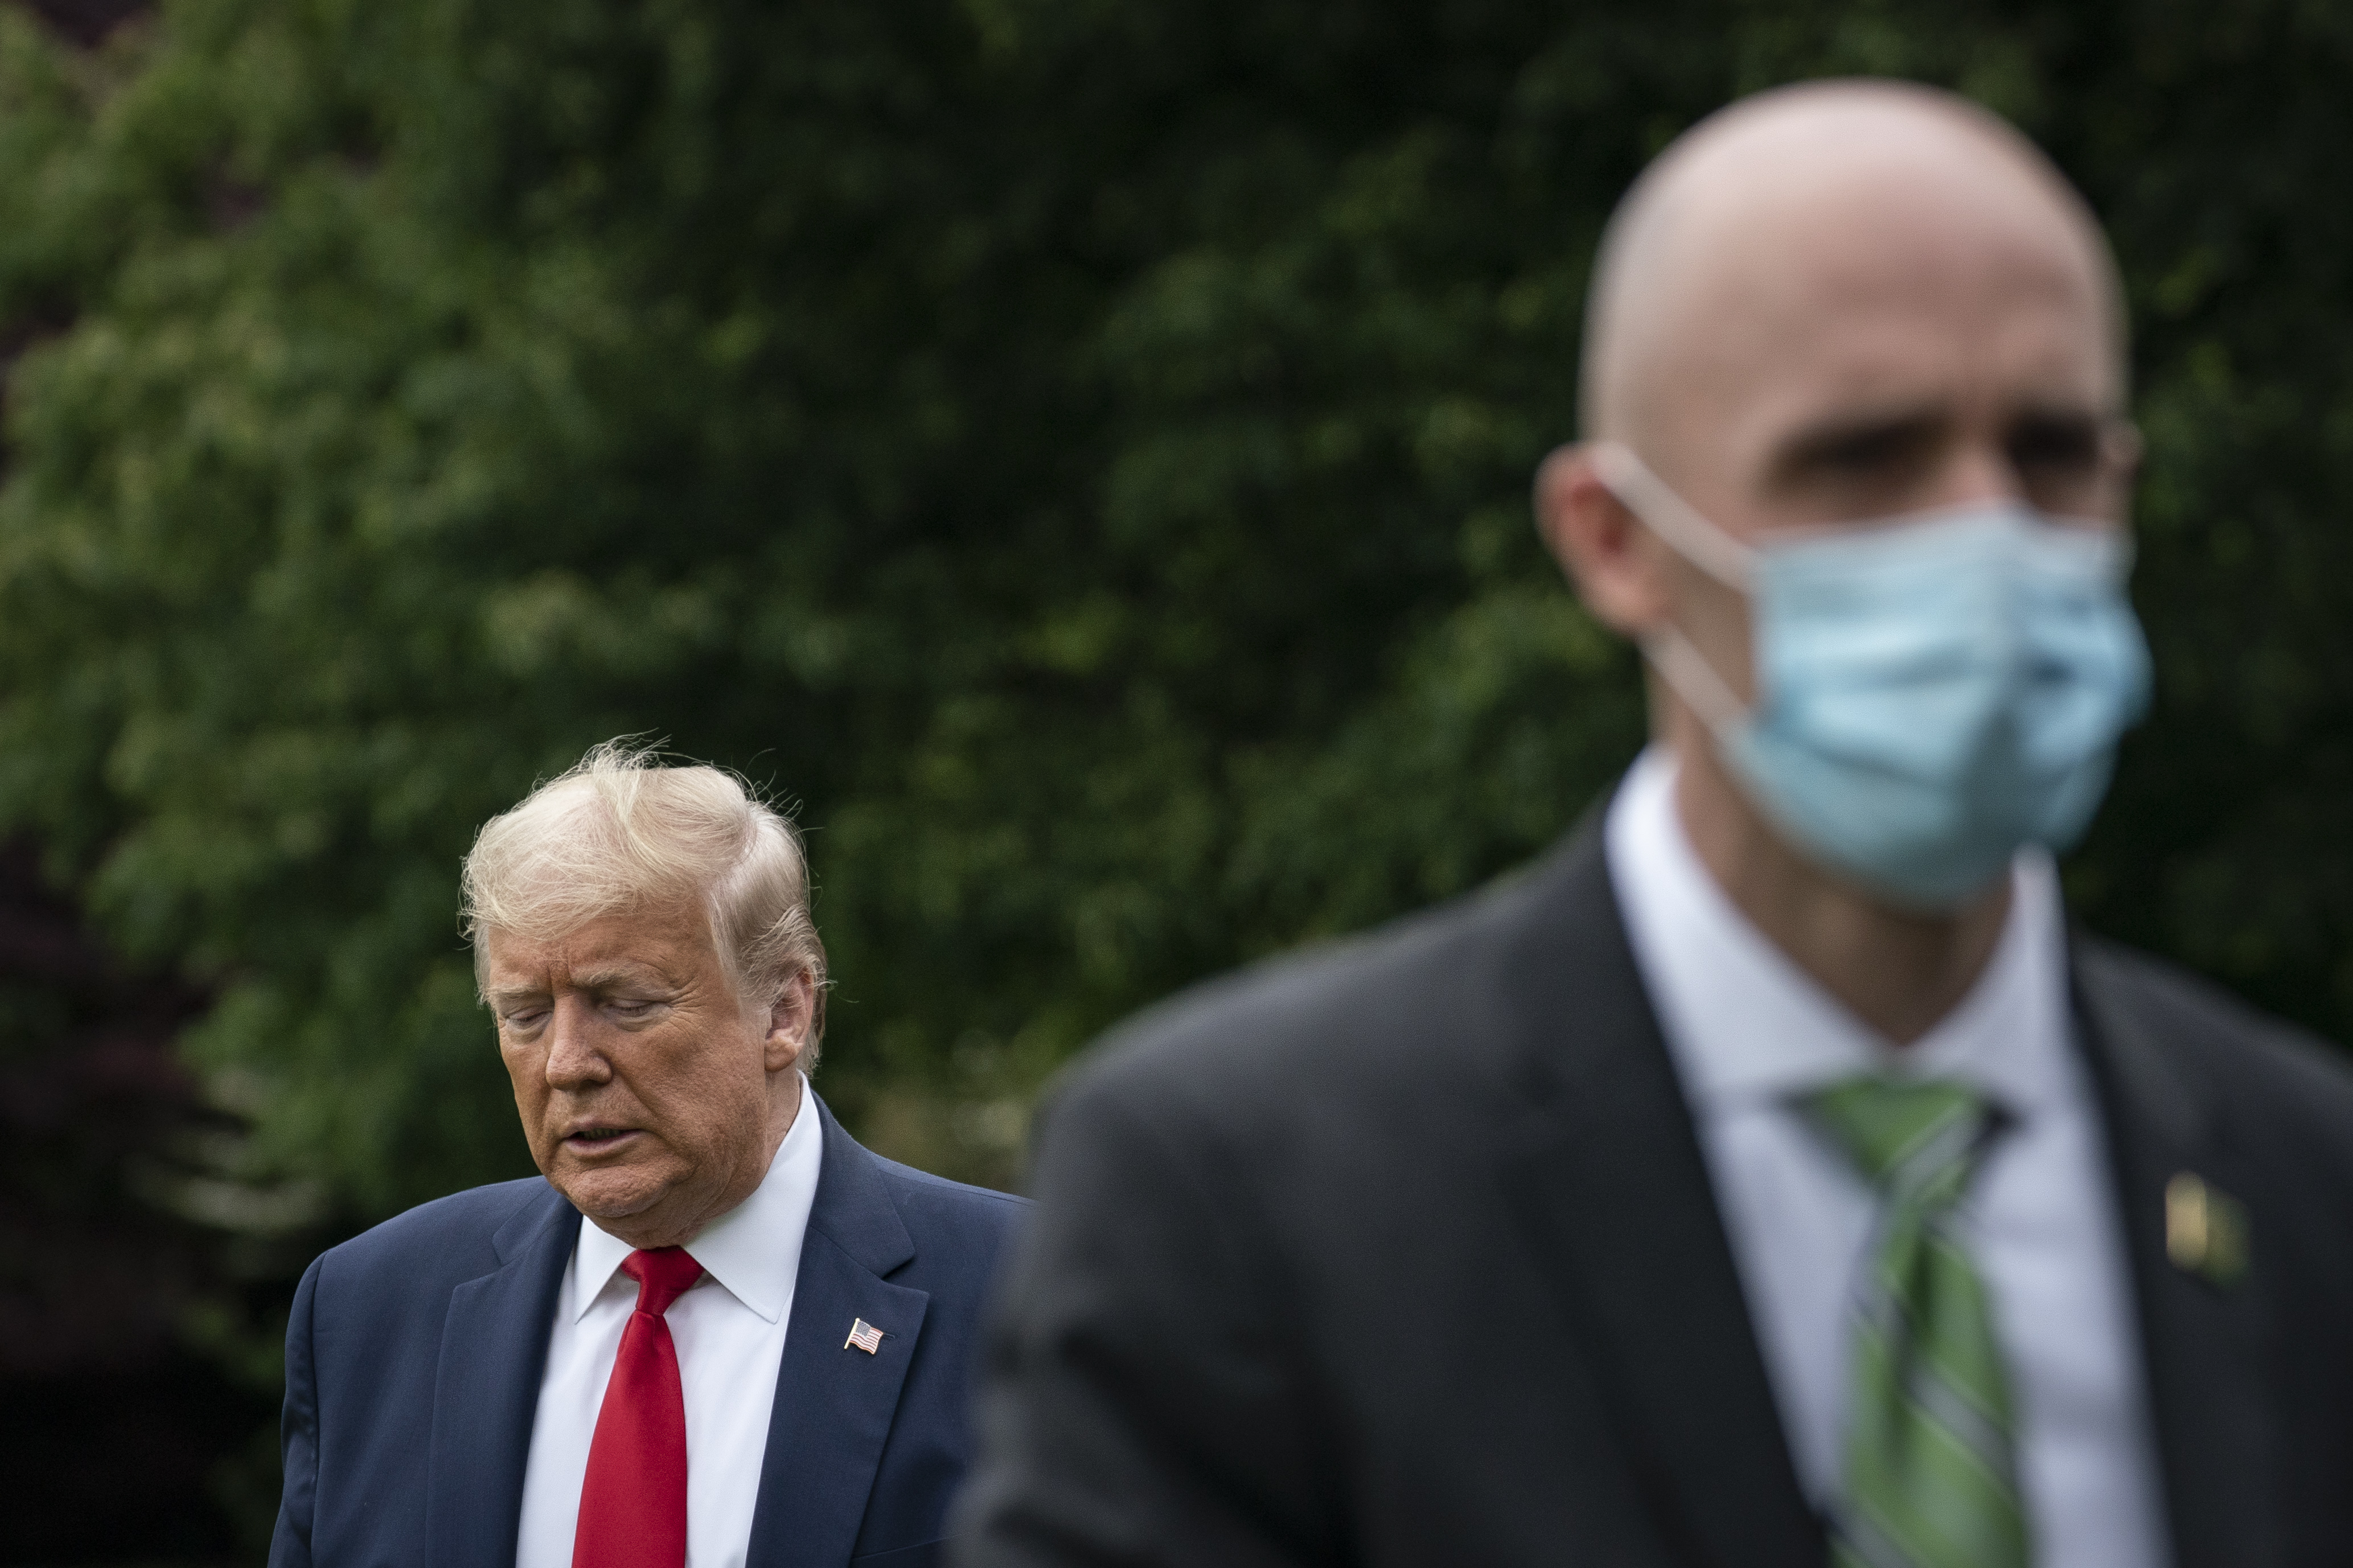 A U.S. Secret Service agent wears a face mask as U.S. President Donald Trump walks to Marine One on the South Lawn of the White House on May 14, 2020. (Photo: Drew Angerer/Getty Images)